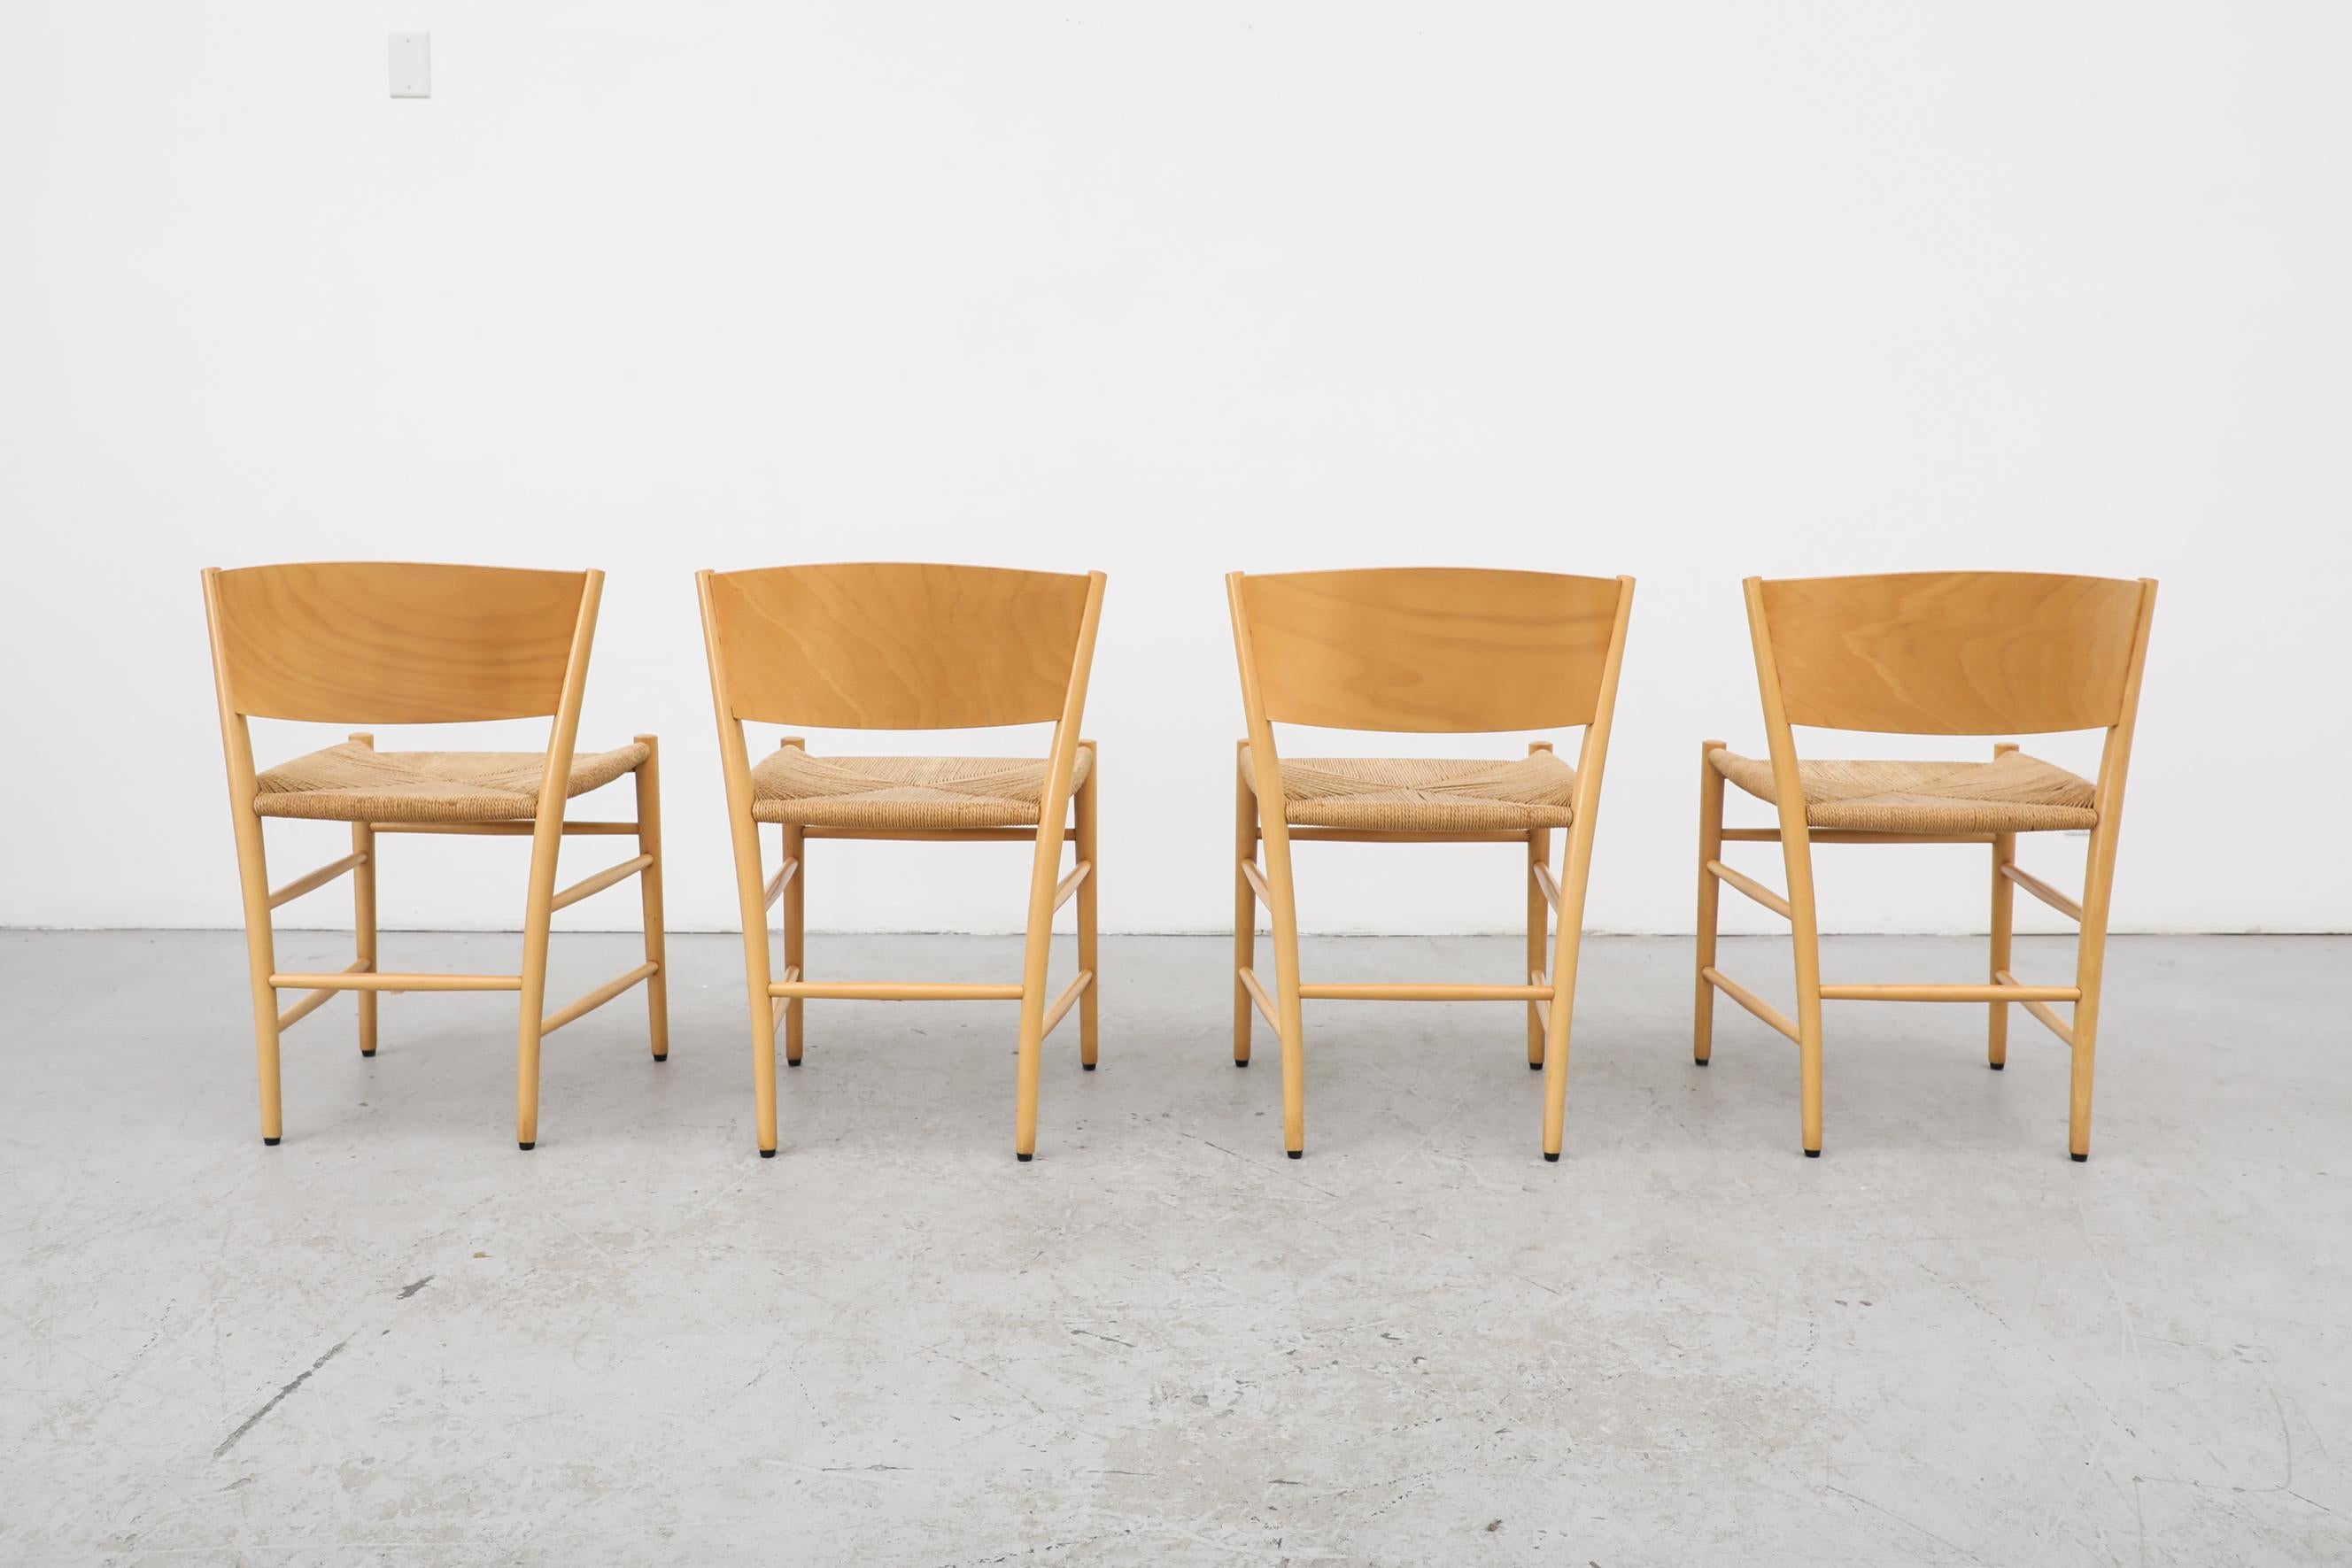 Hand-Woven Set of 4 1990s Danish 'Jive' Chairs by Tom Stepp in Birch for Kvist Møbler For Sale